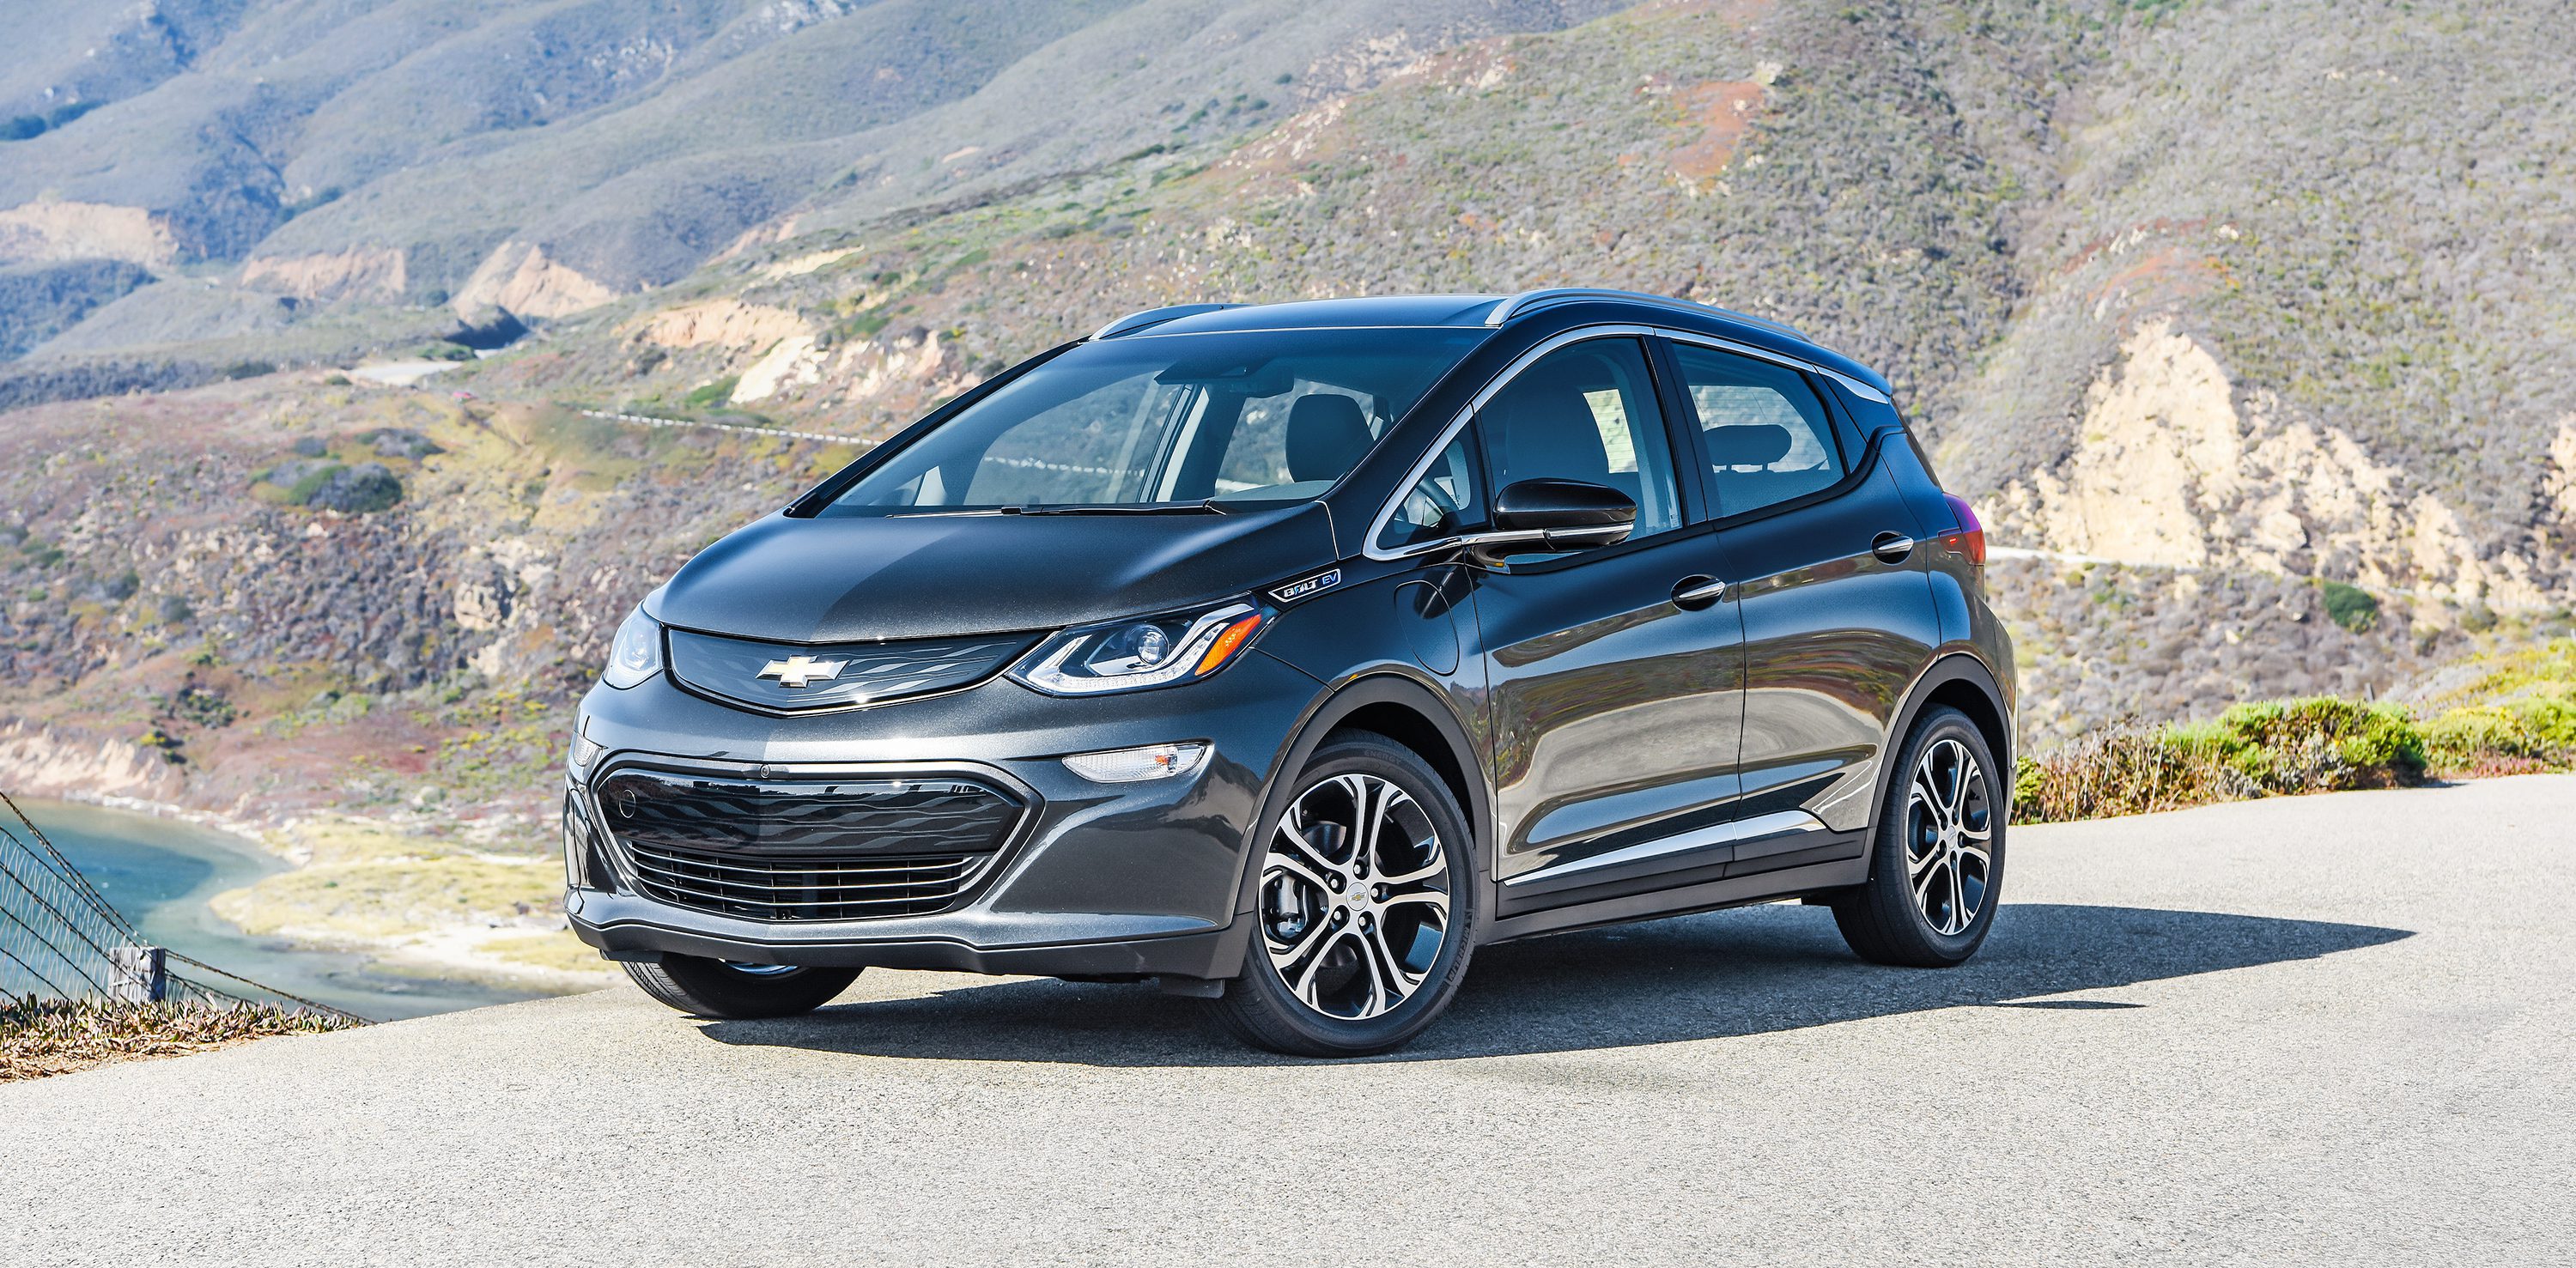 GM launches Chevy Bolt EV's leasing program 309 a month and 0 down